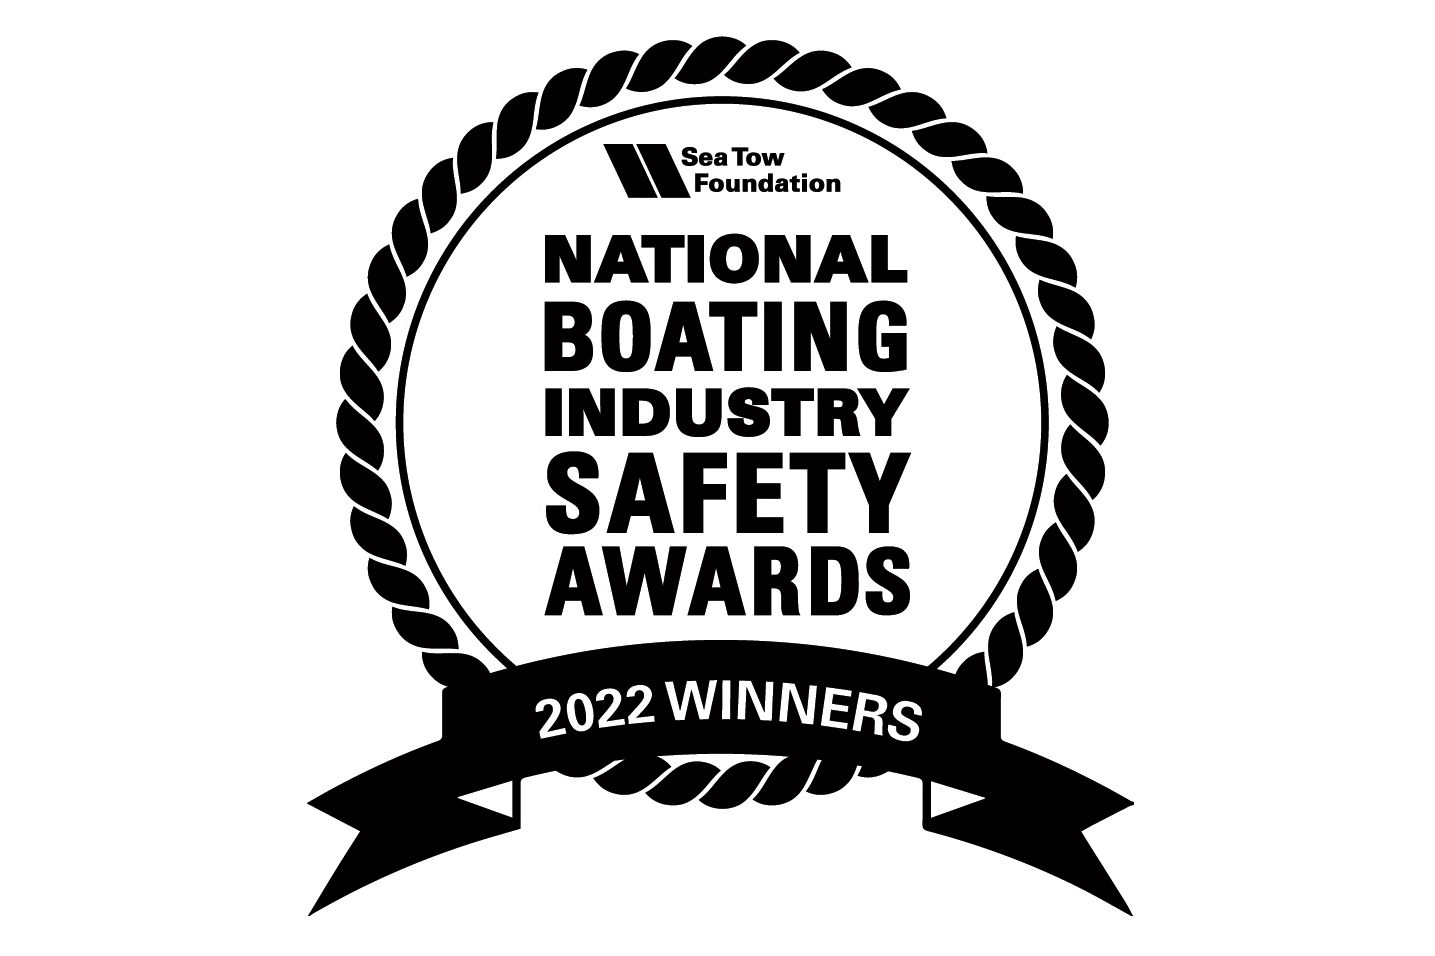 Sea Tow Foundation National Boating Safety Industry Awards Announced For 2022